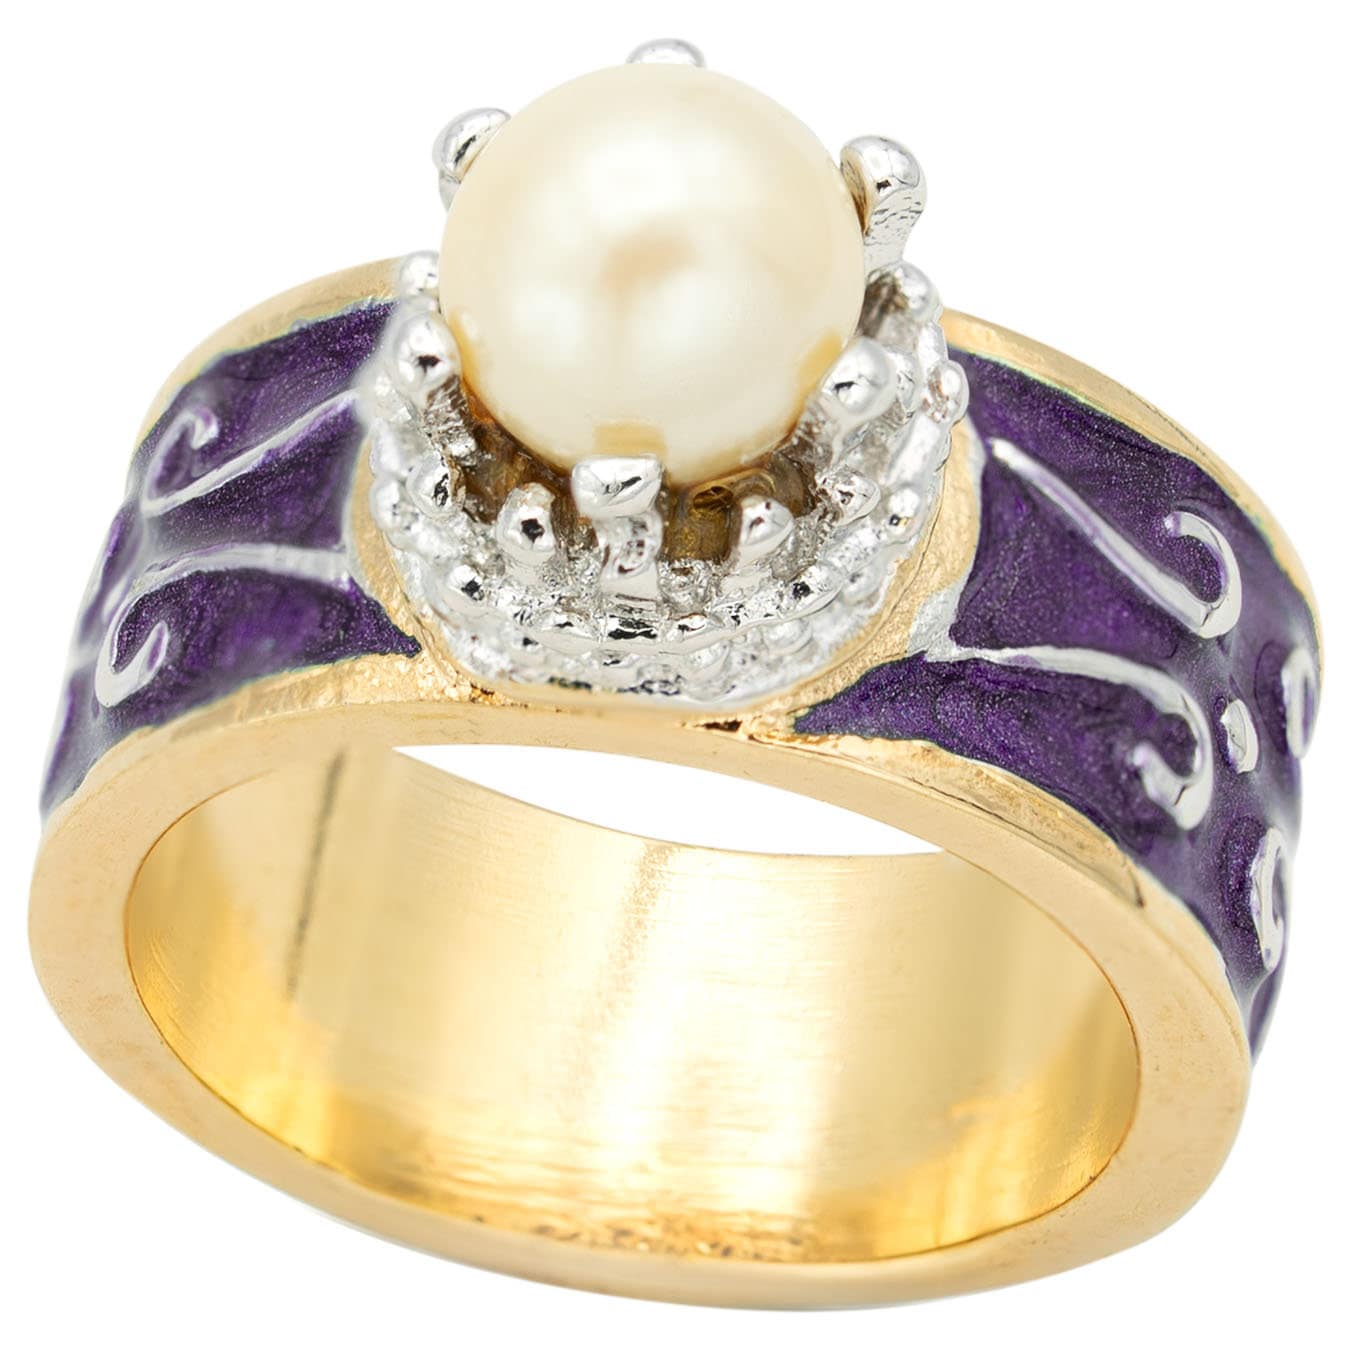 Vintage 1980s Hand Painted Purple Enamel Ring with Pearl Bead 18k Gold Plated Made in USA #R9014